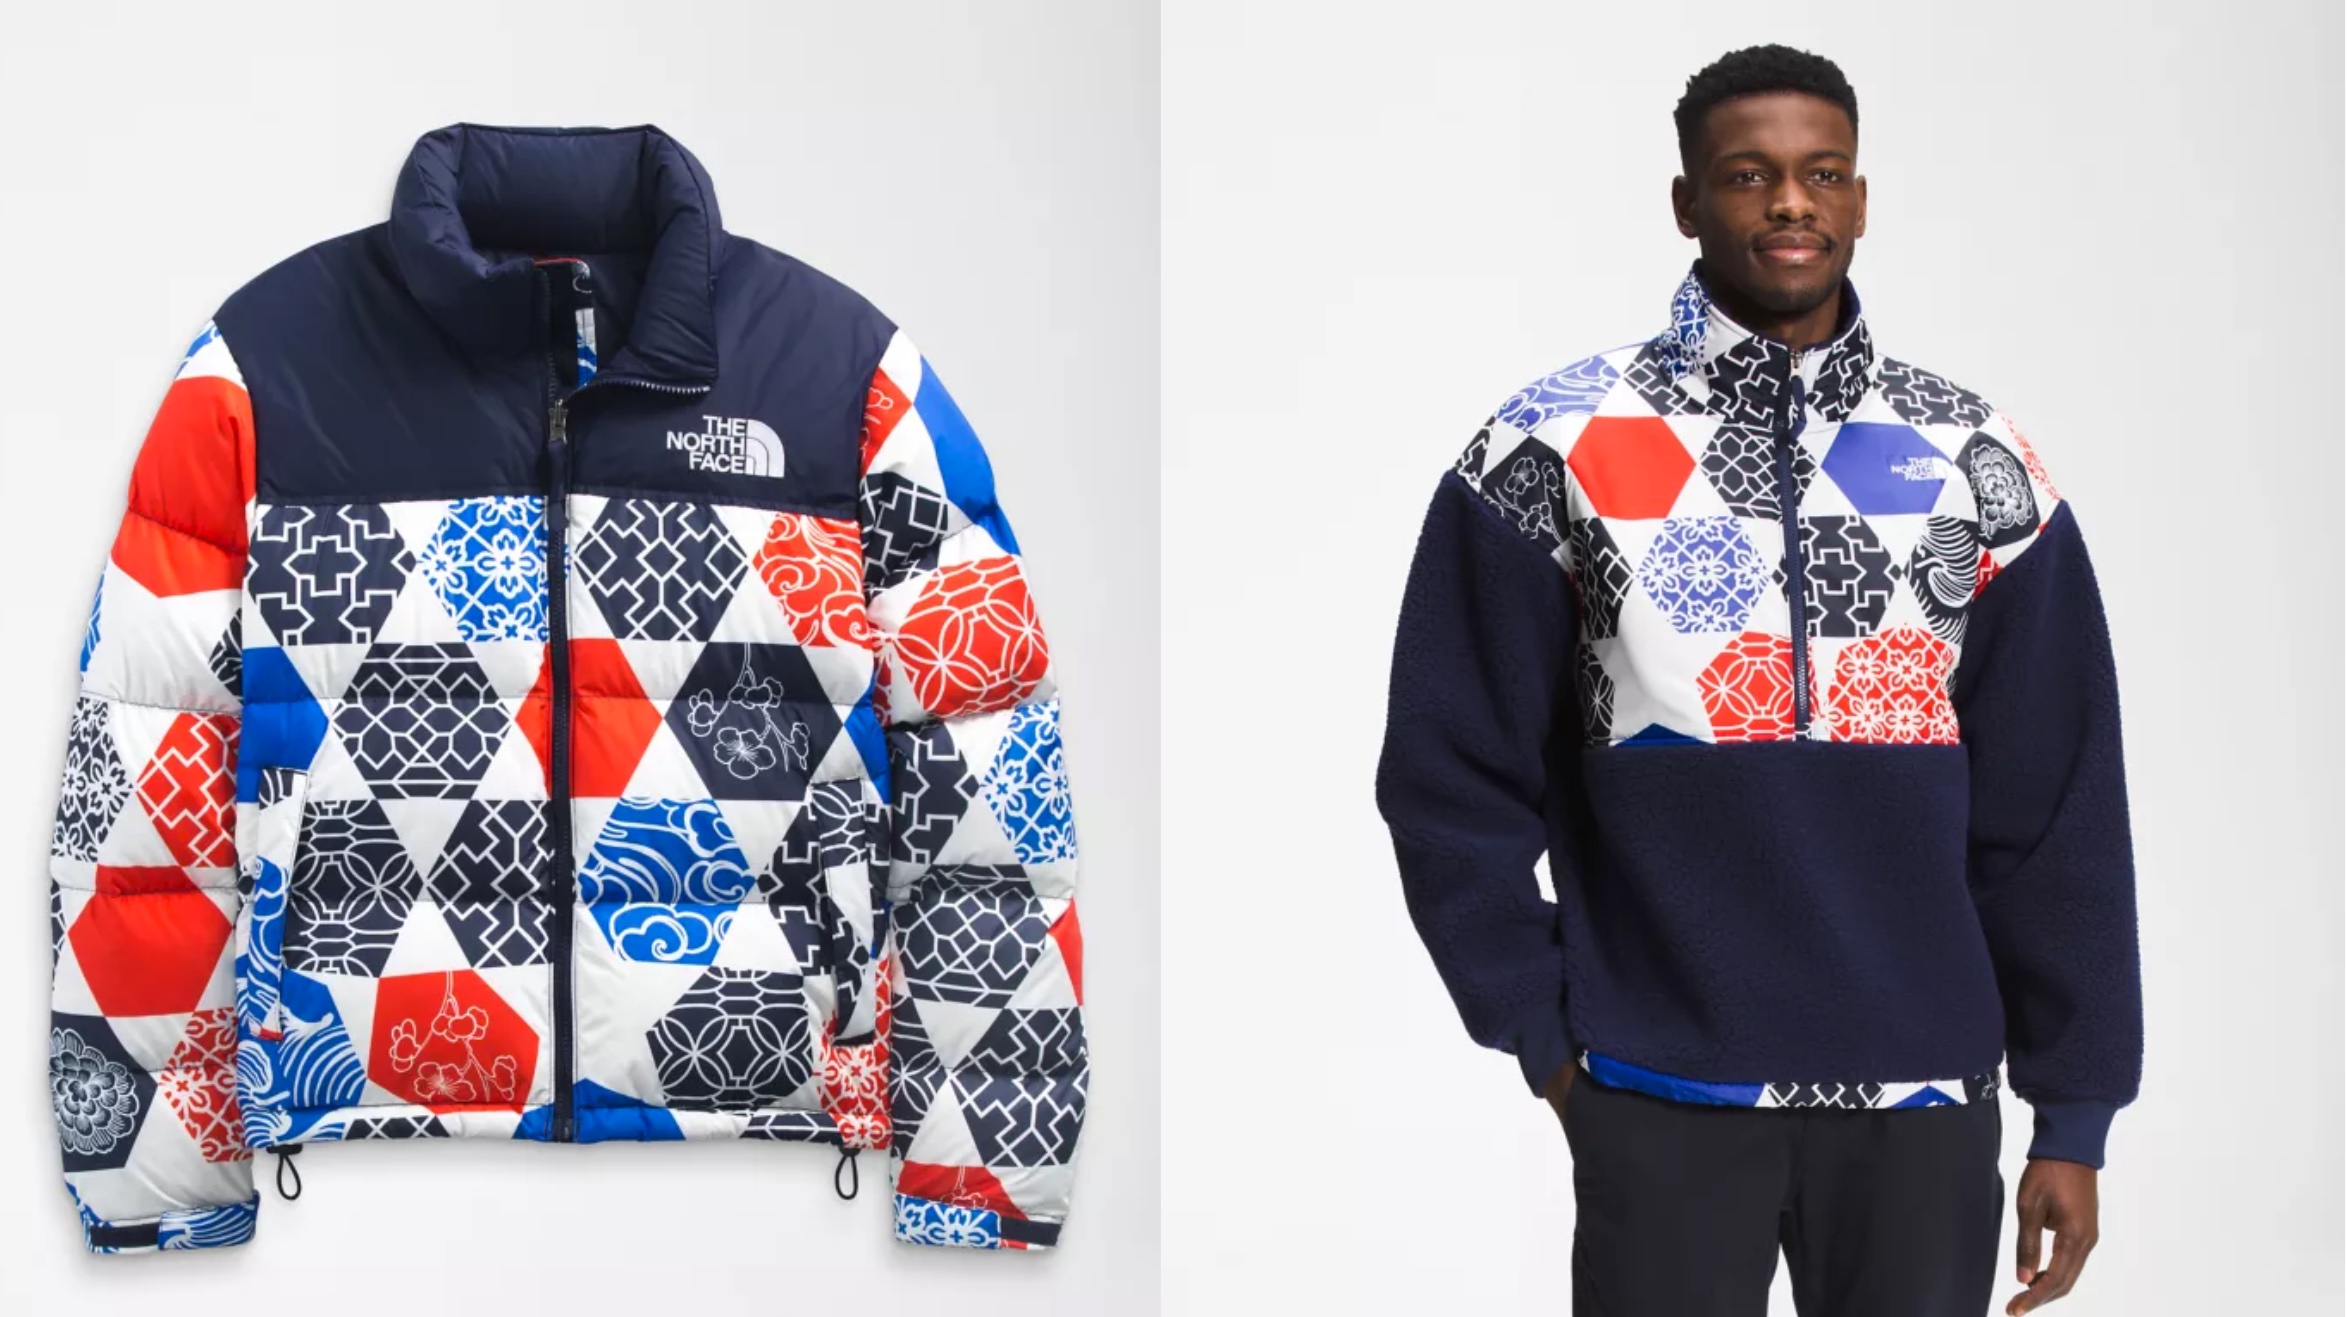 The North Face International Collection debuts limited-edition 